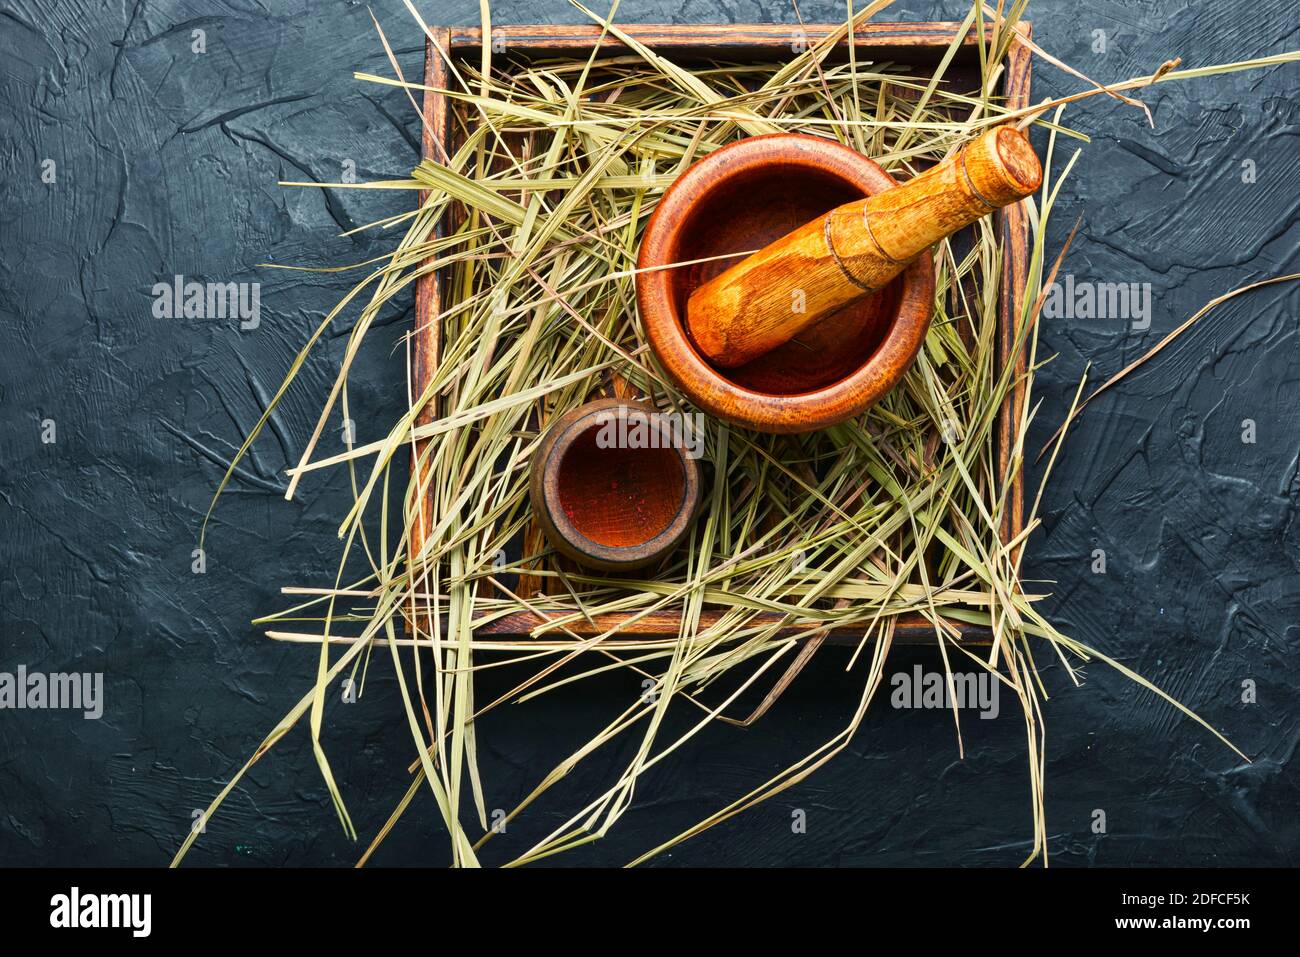 Medicinal use of the herb sweet grass in herbal medicine. Stock Photo